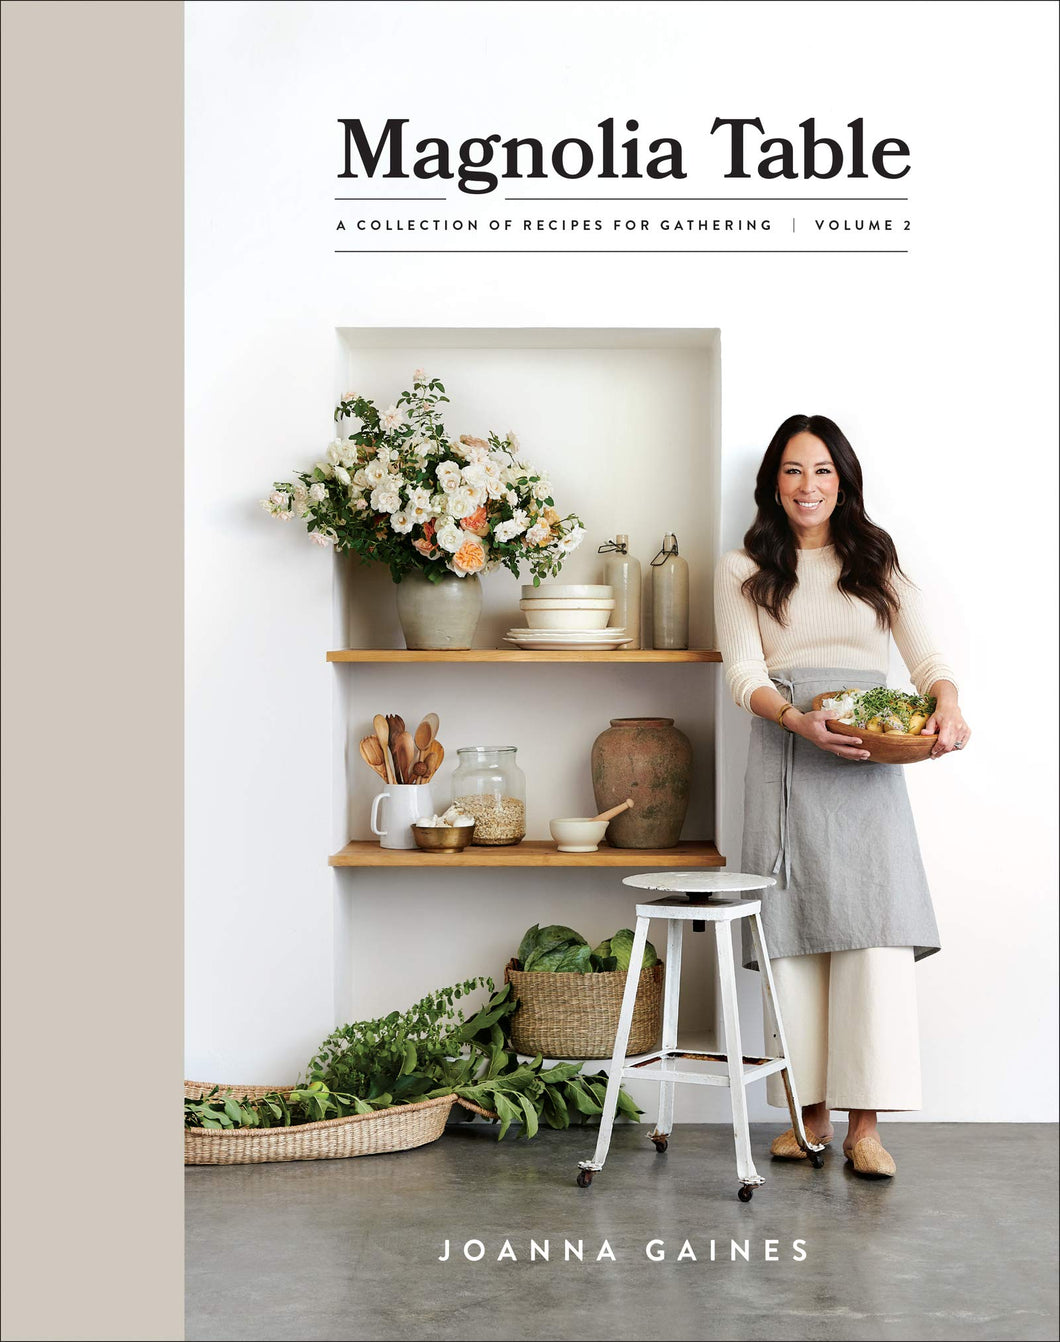 Magnolia Table, Volume 2: A collection of recipes for gathering.